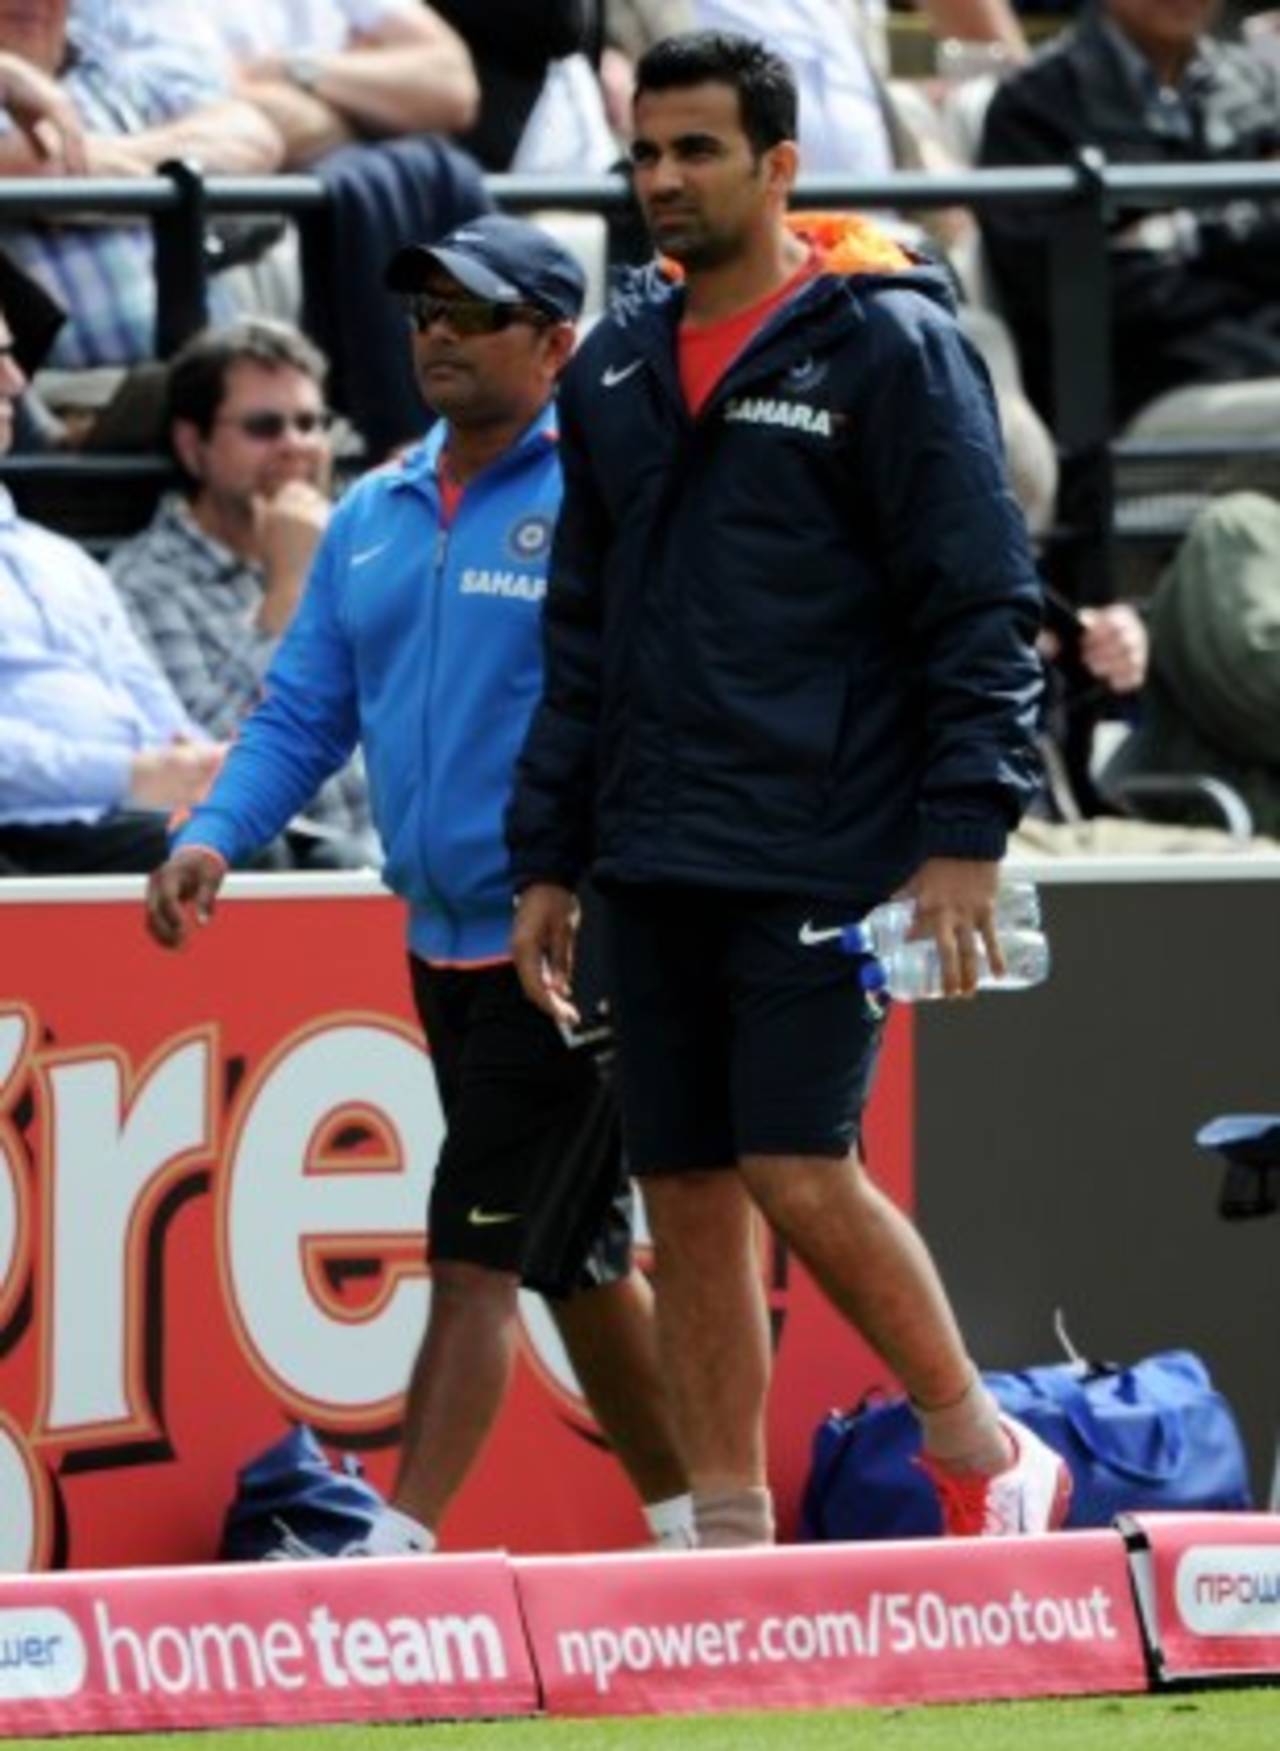 The injured Zaheer Khan walks around the ground, England v India, 1st Test, Lord's, 2nd day, July 22, 2011